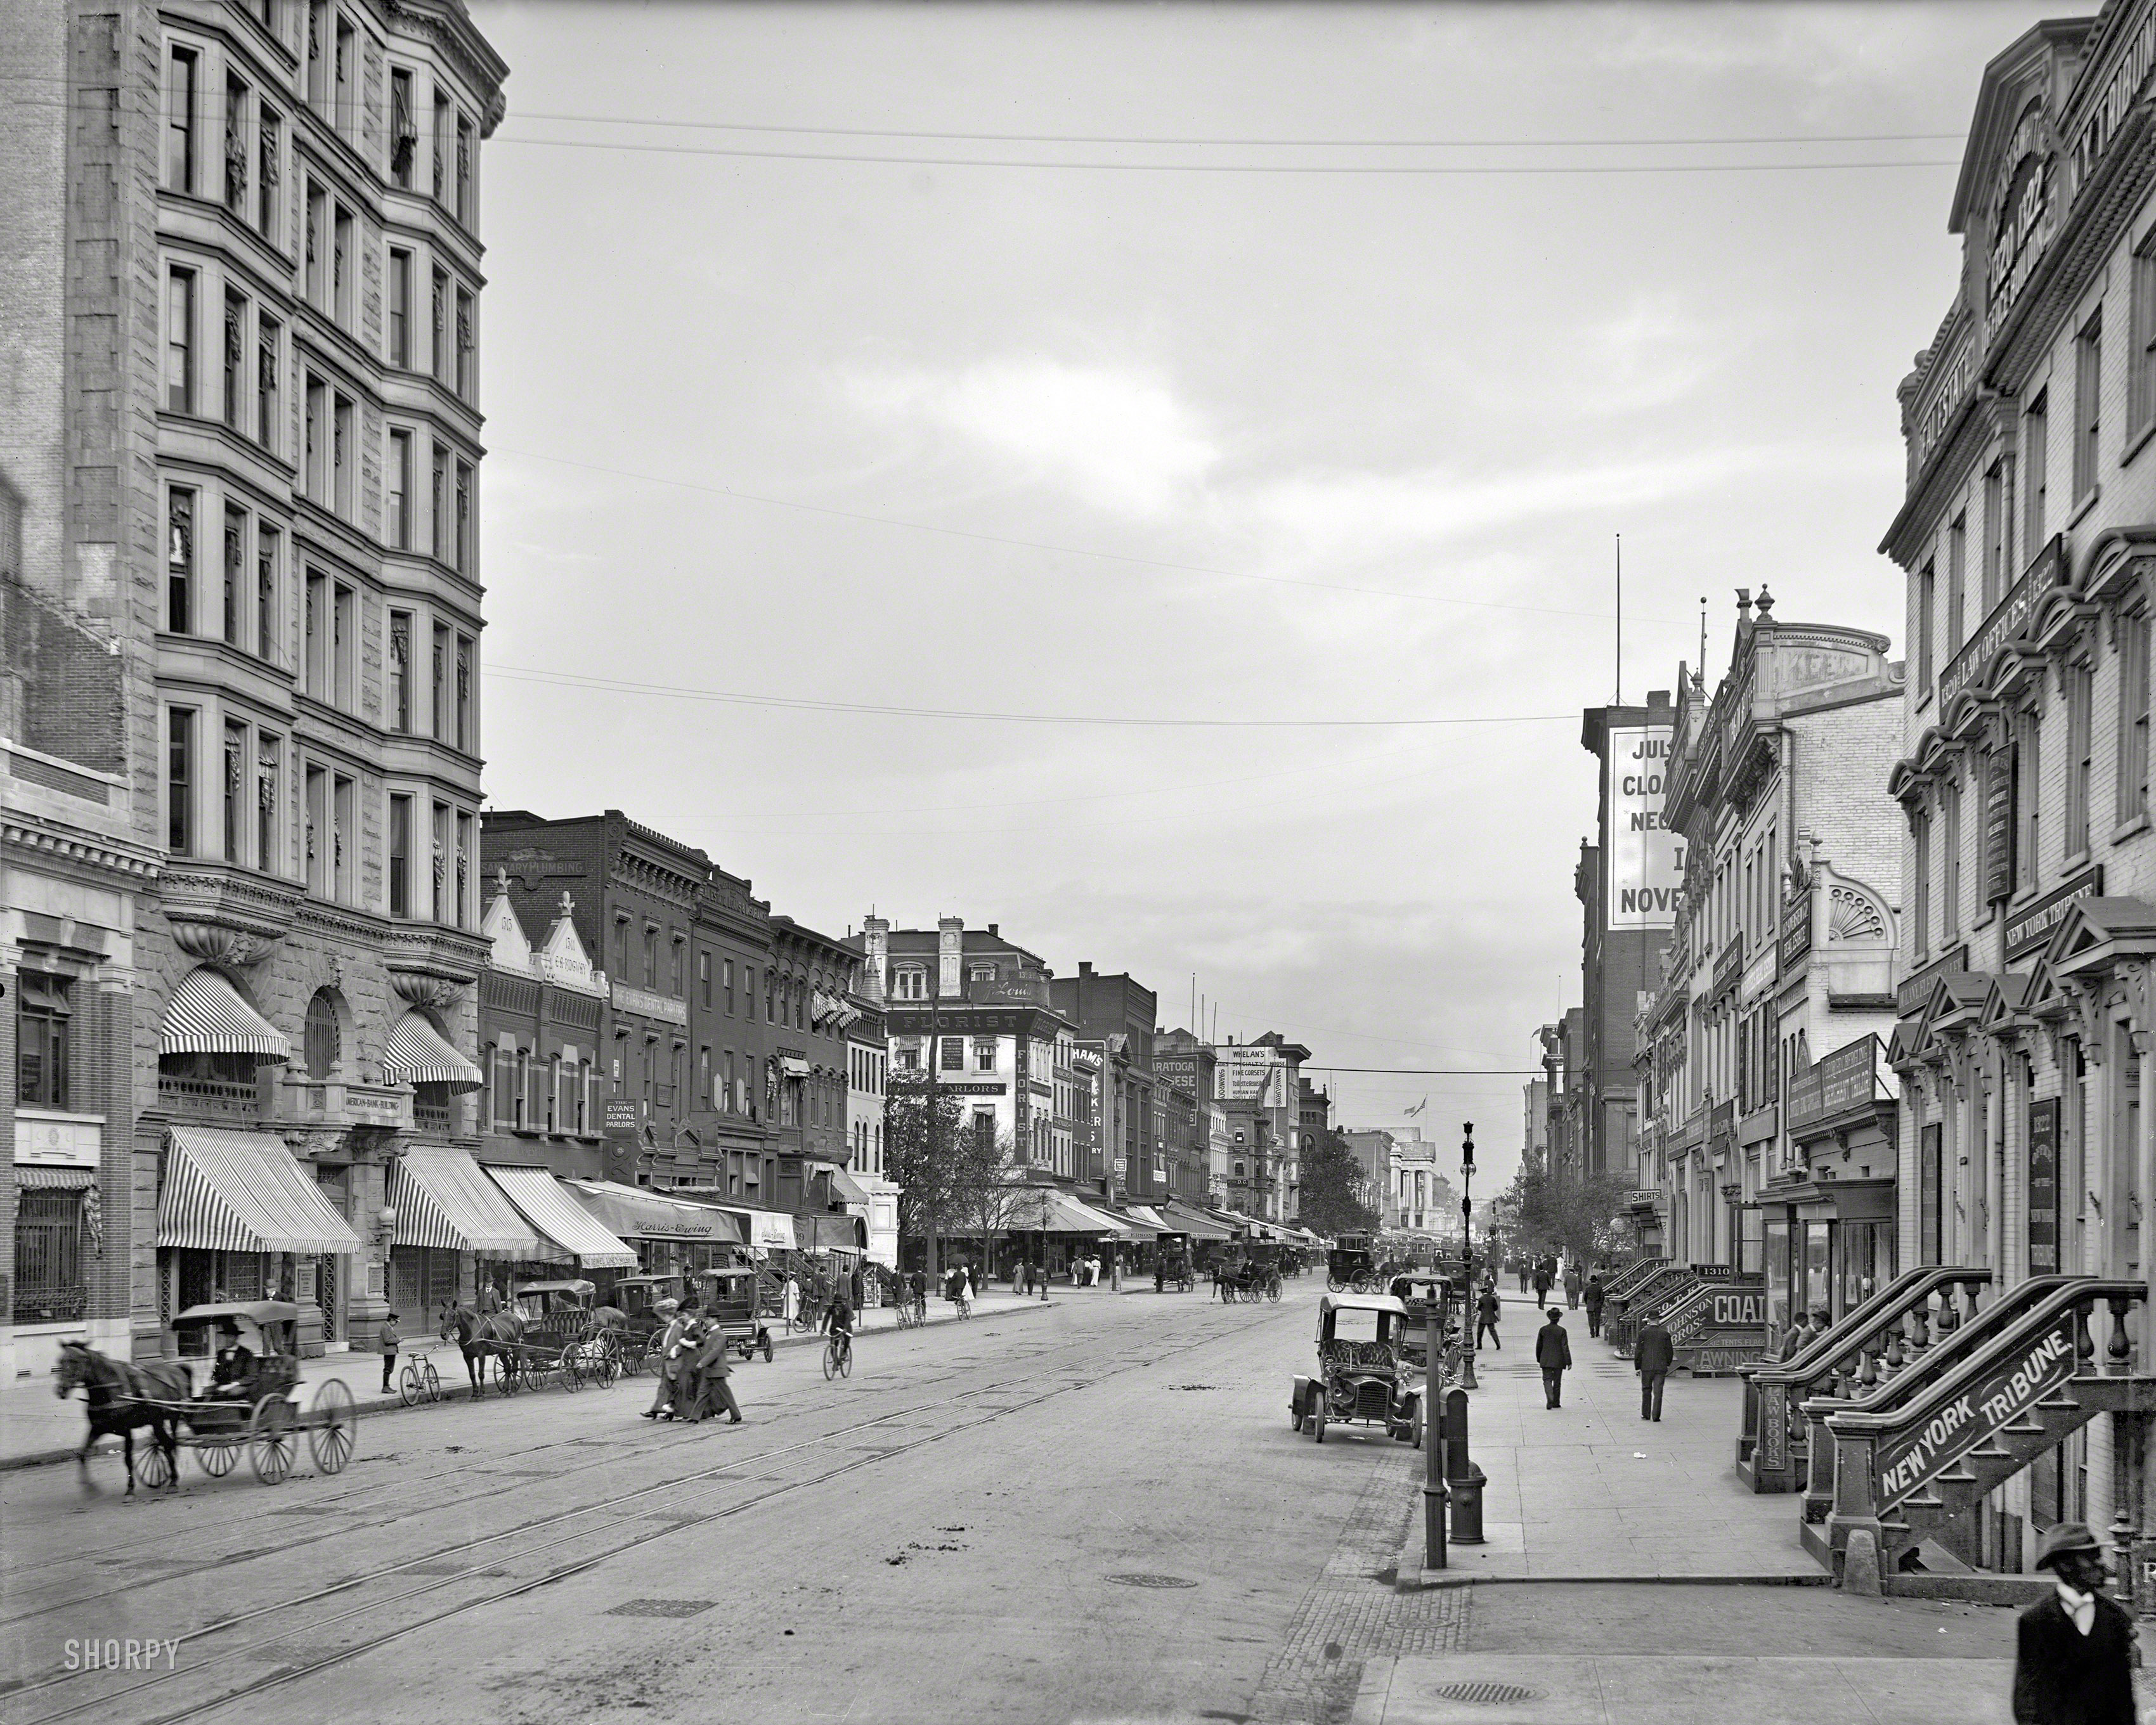 F Street Northwest in Washington, D.C., circa 1906. Note the Harris & Ewing photographic studio, source of many of our images here on Shorpy, at left. 8x10 inch dry plate glass negative, Detroit Publishing Company. View full size.